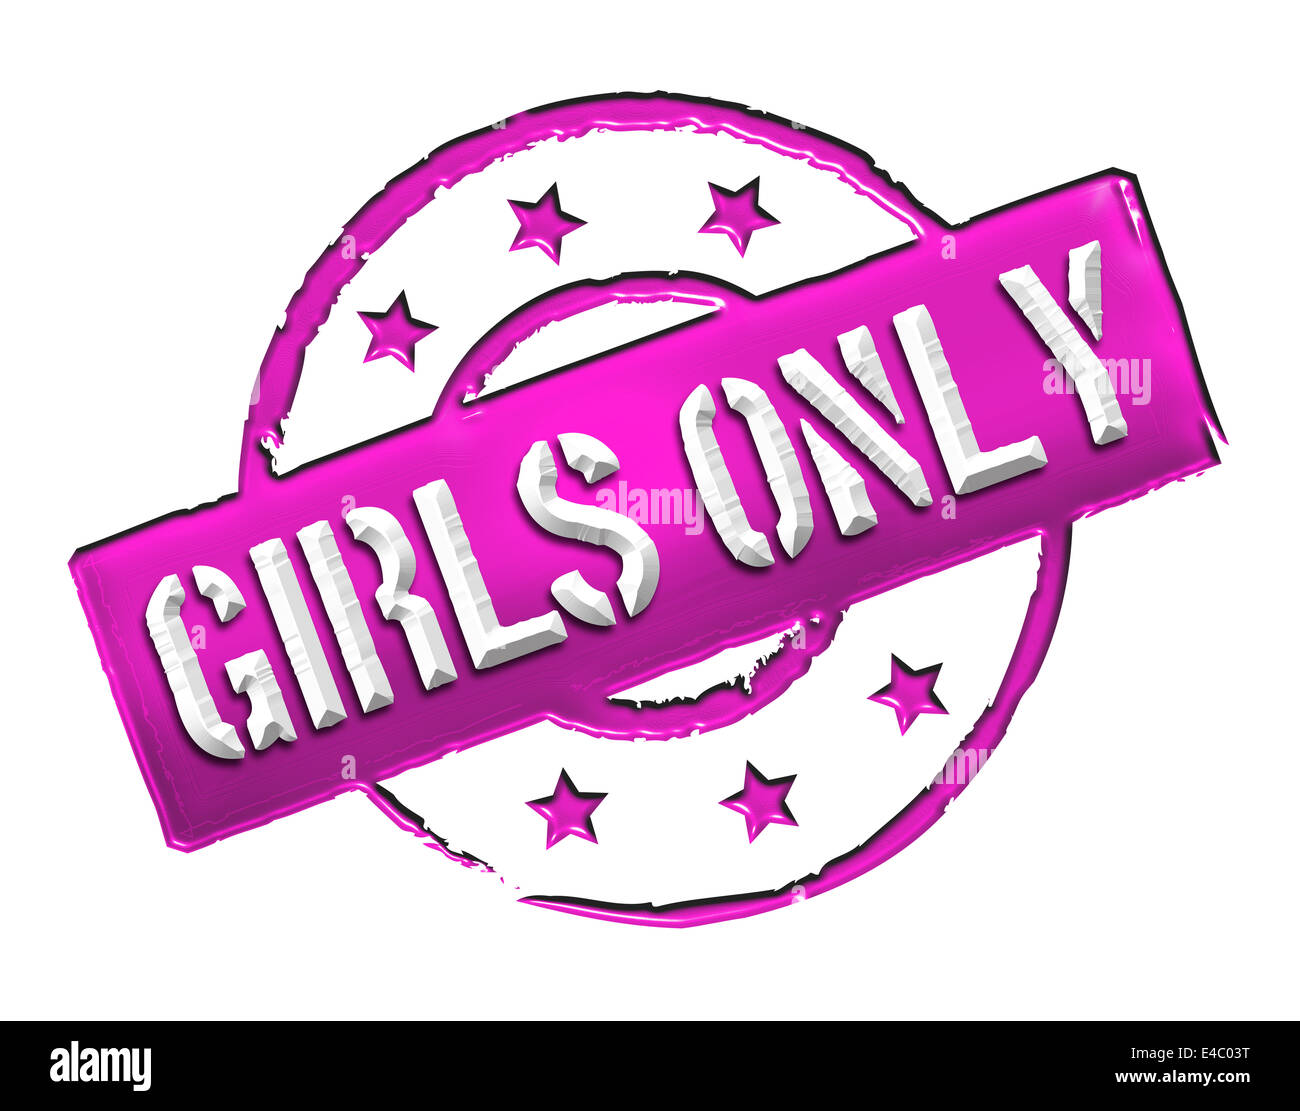 Girls - Alamy only - Stock Photo Stamp